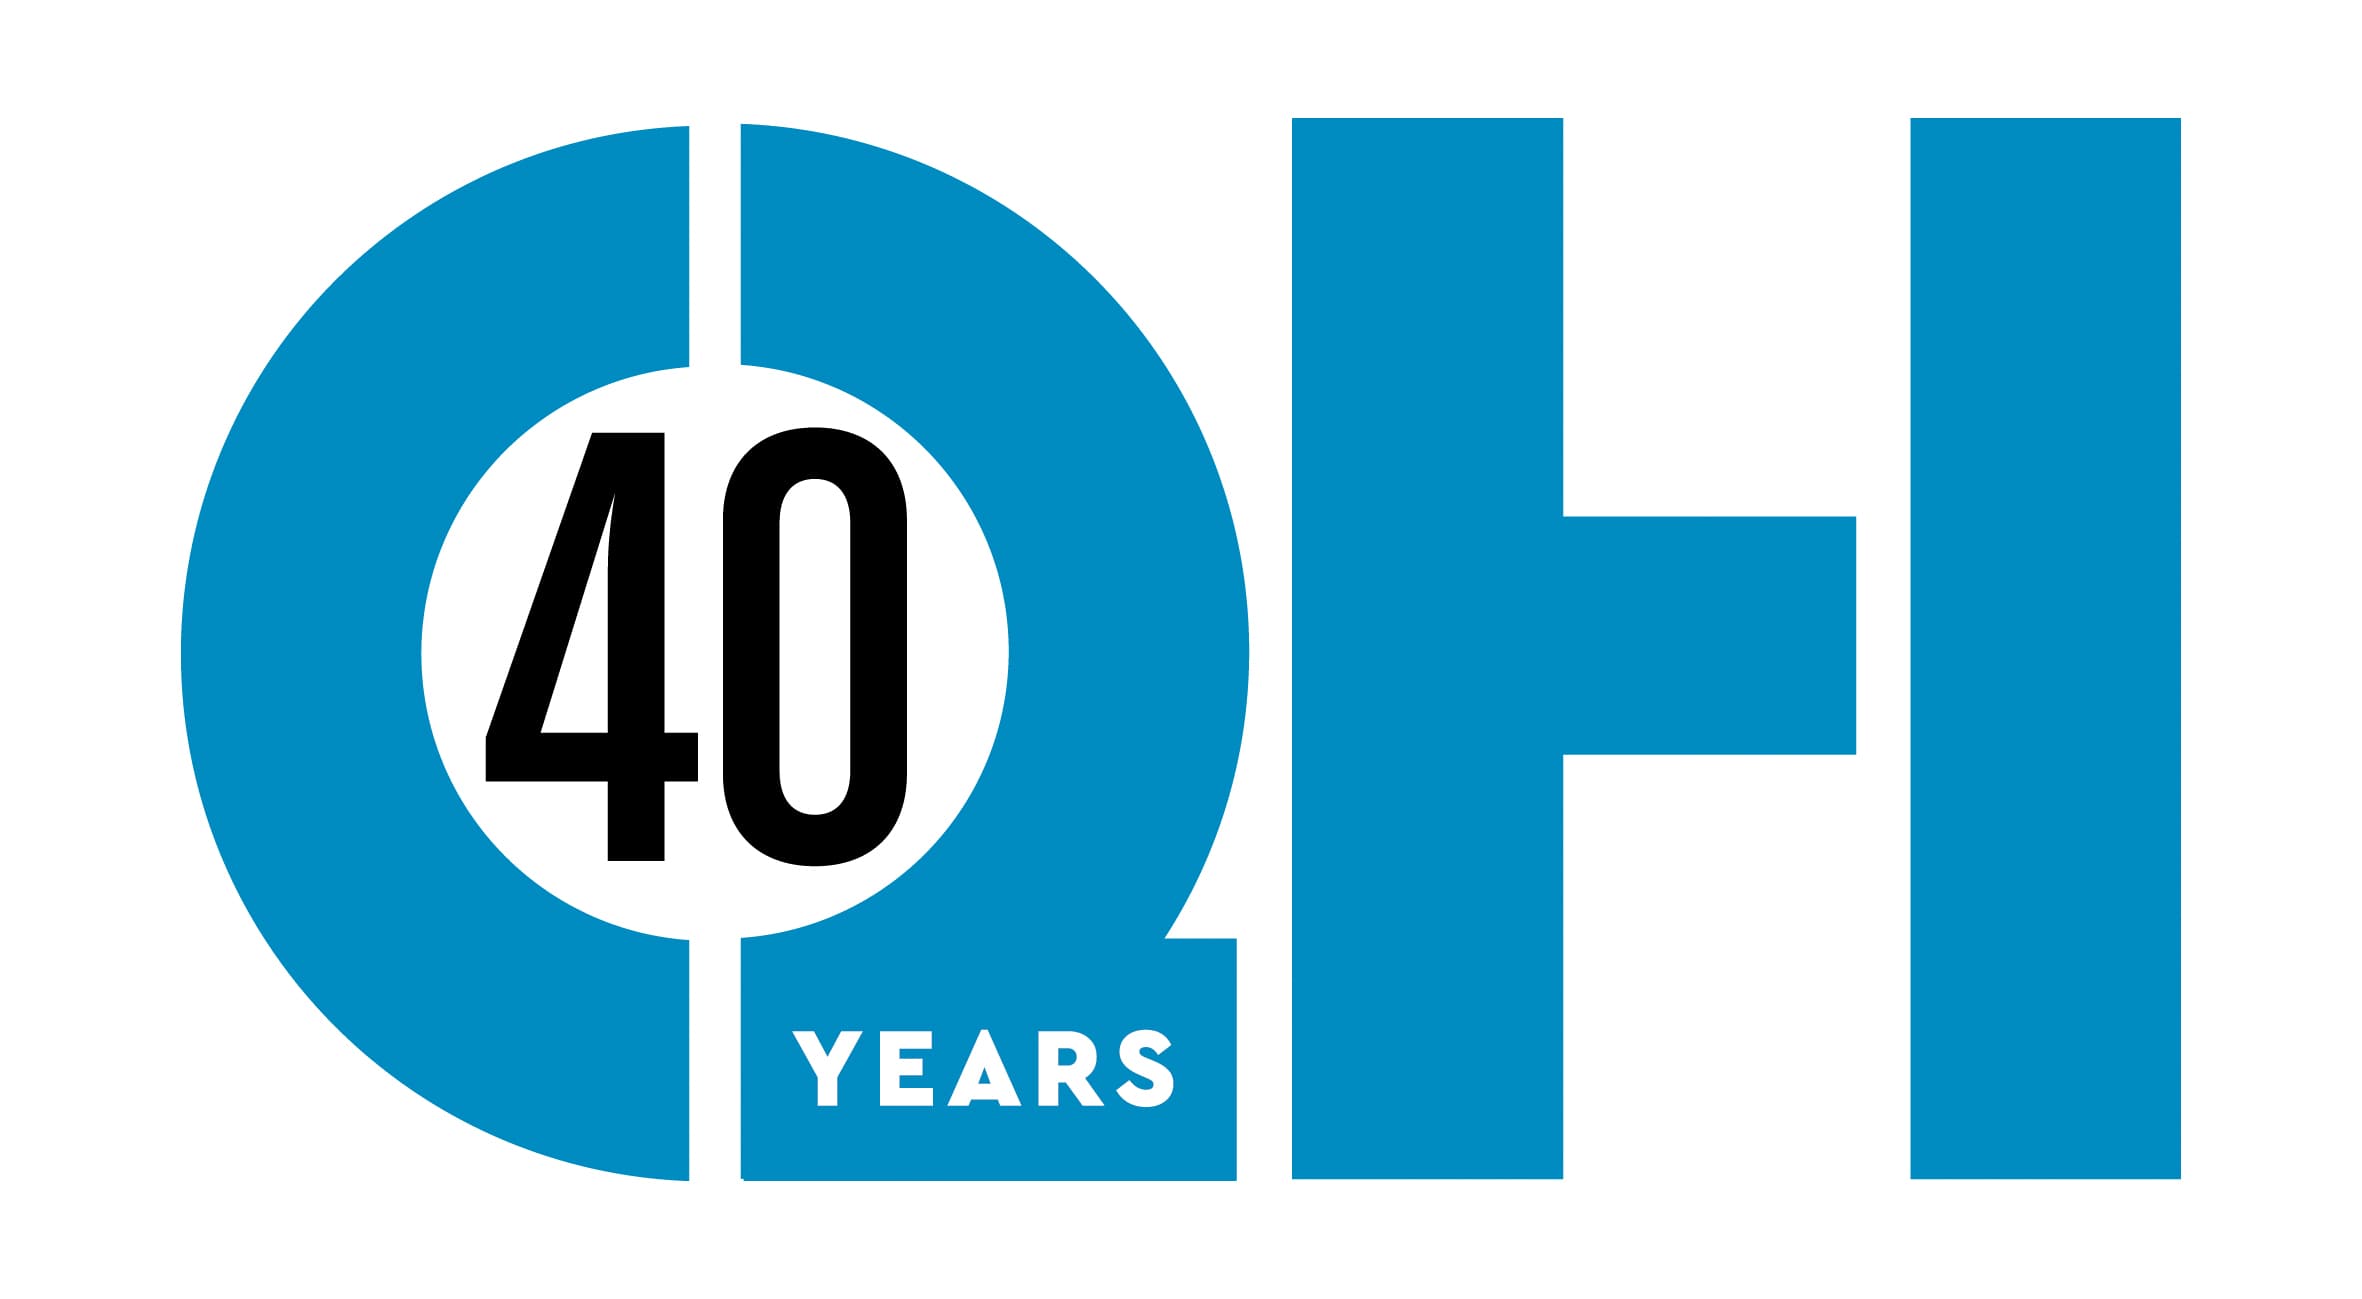 The Queen's Hall 40th anniversary logo